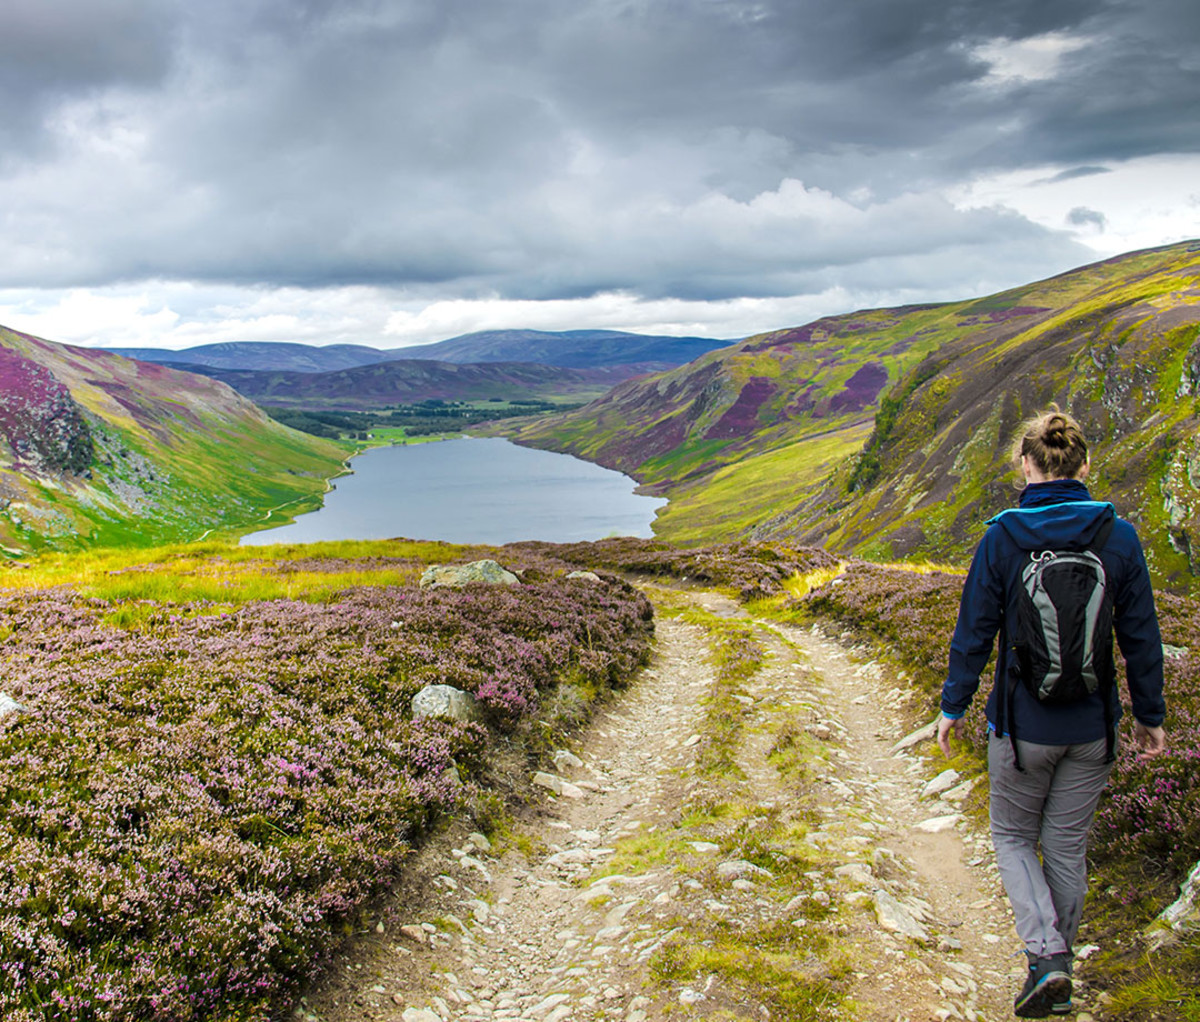 Scotland road trip: Hiking from Cairn Lick to Loch Lee at Cairngorms National Park